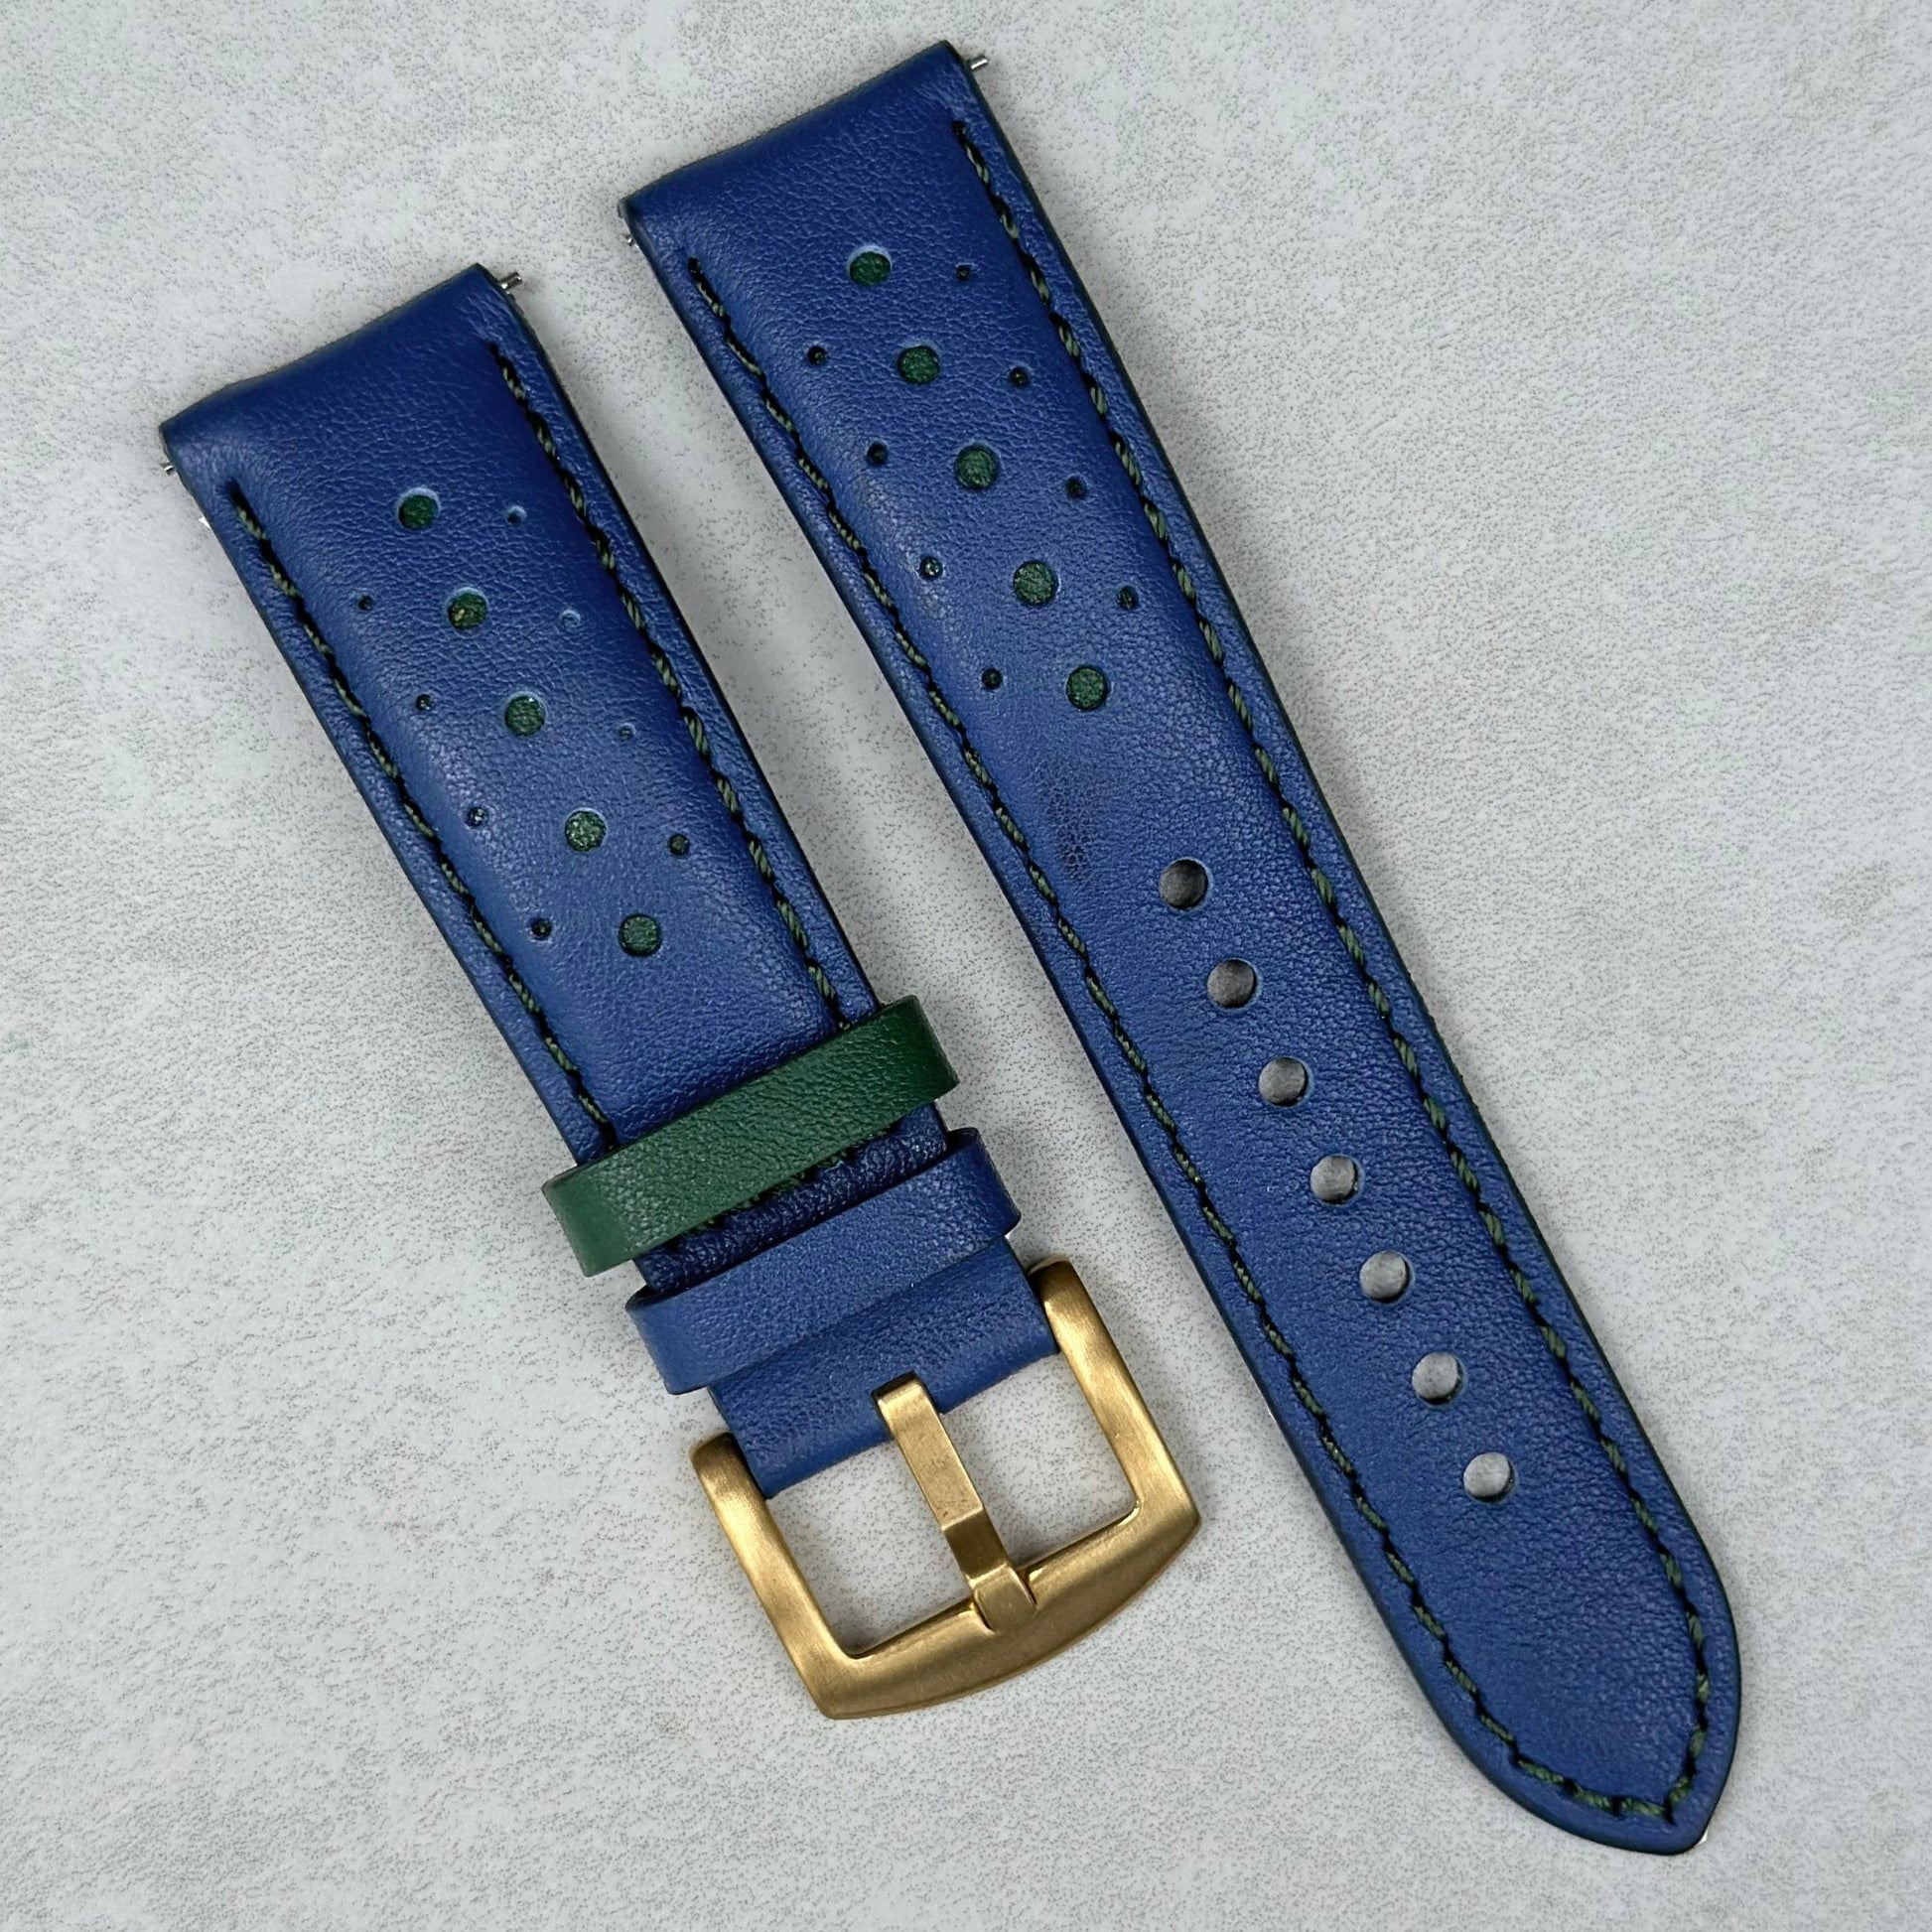 Le Mans blue and green full grain leather racing watch strap. Brushed PVD gold 316L stainless steel buckle.